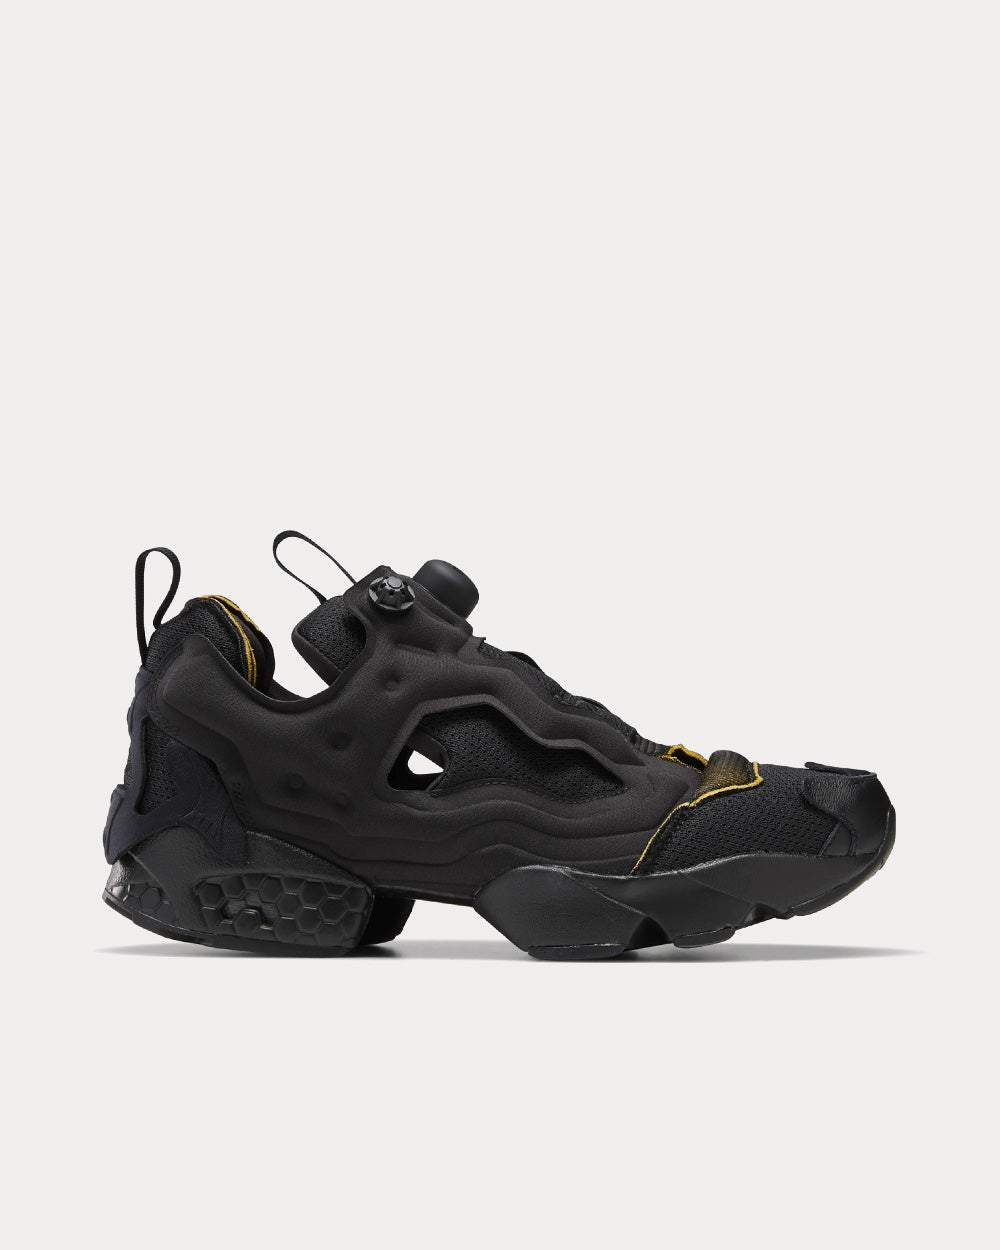 Instapump Fury Memory Of Shoes Core Black / Cloud White / Black White Low  Top Sneakers